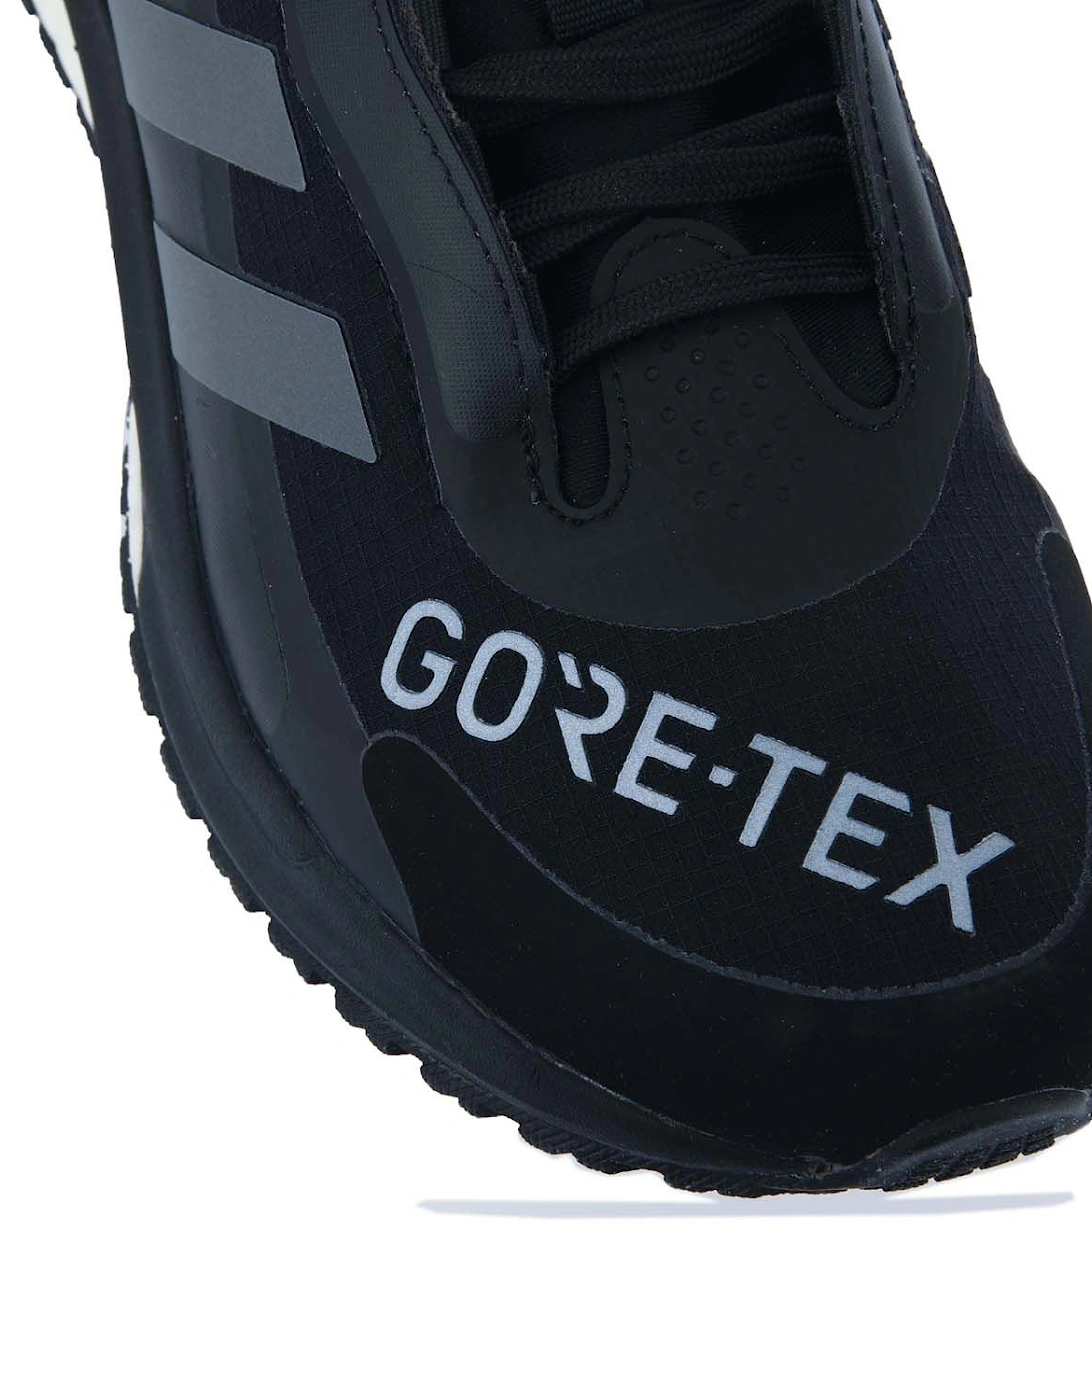 Womens SolarGlide 4 GORE-TEX Running Shoes